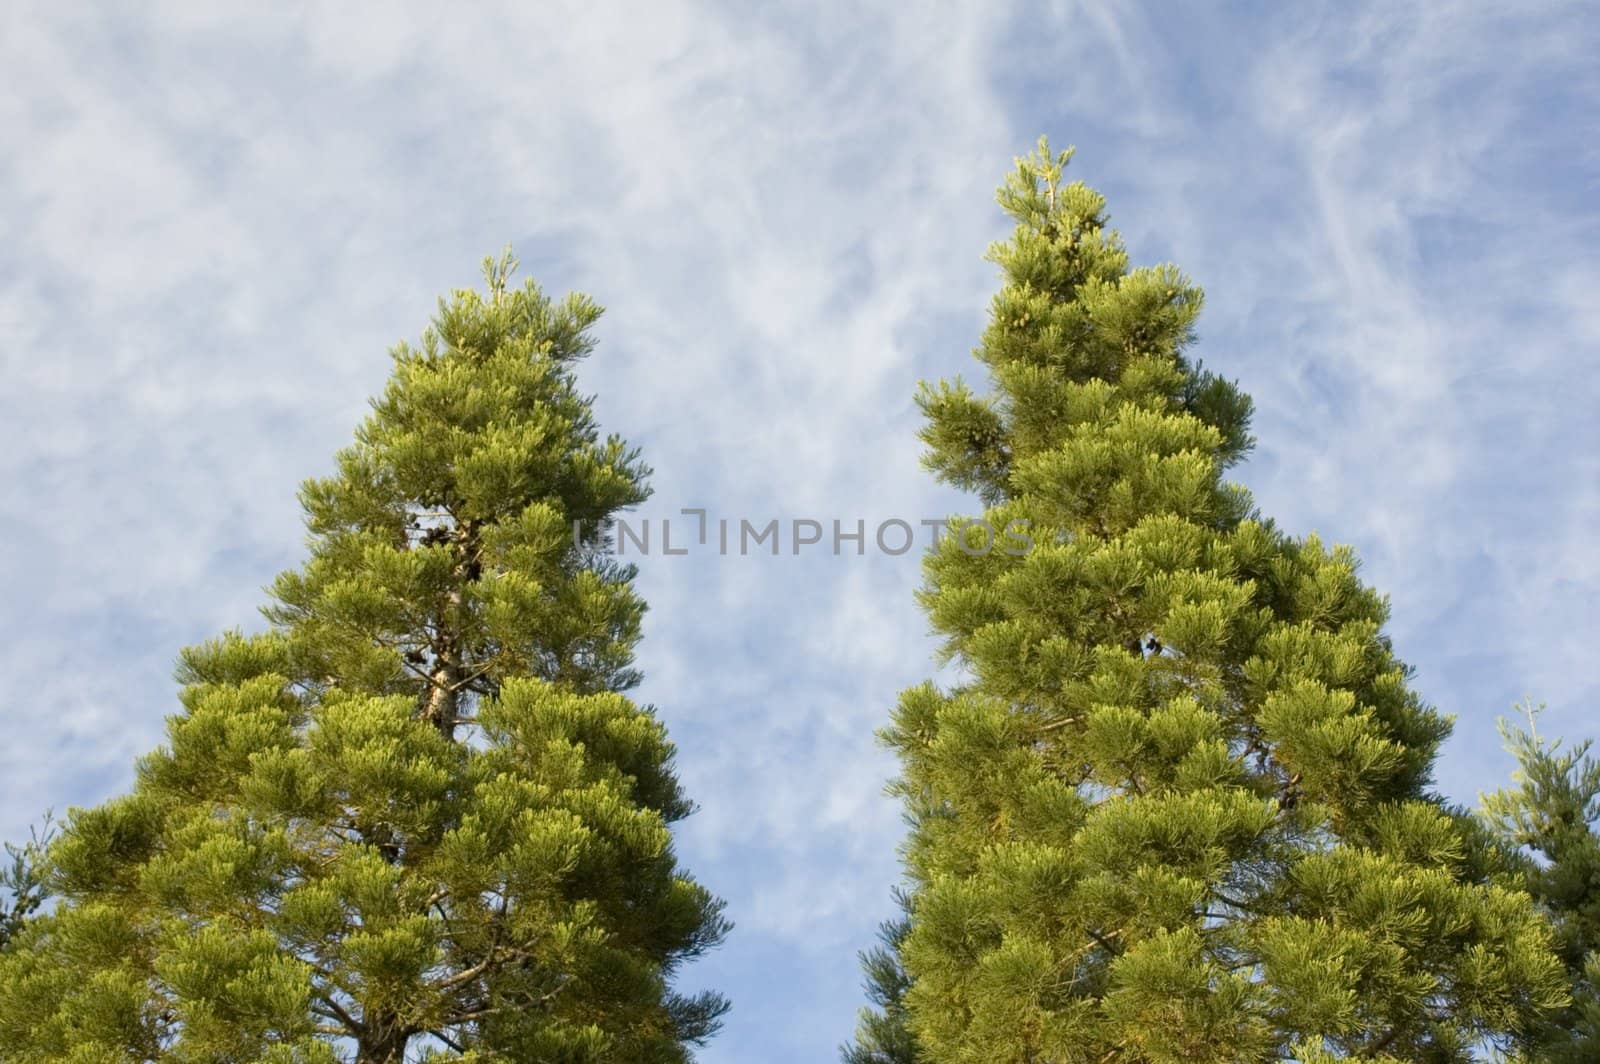 Two pine trees with blue sky and wispy clouds behind them.